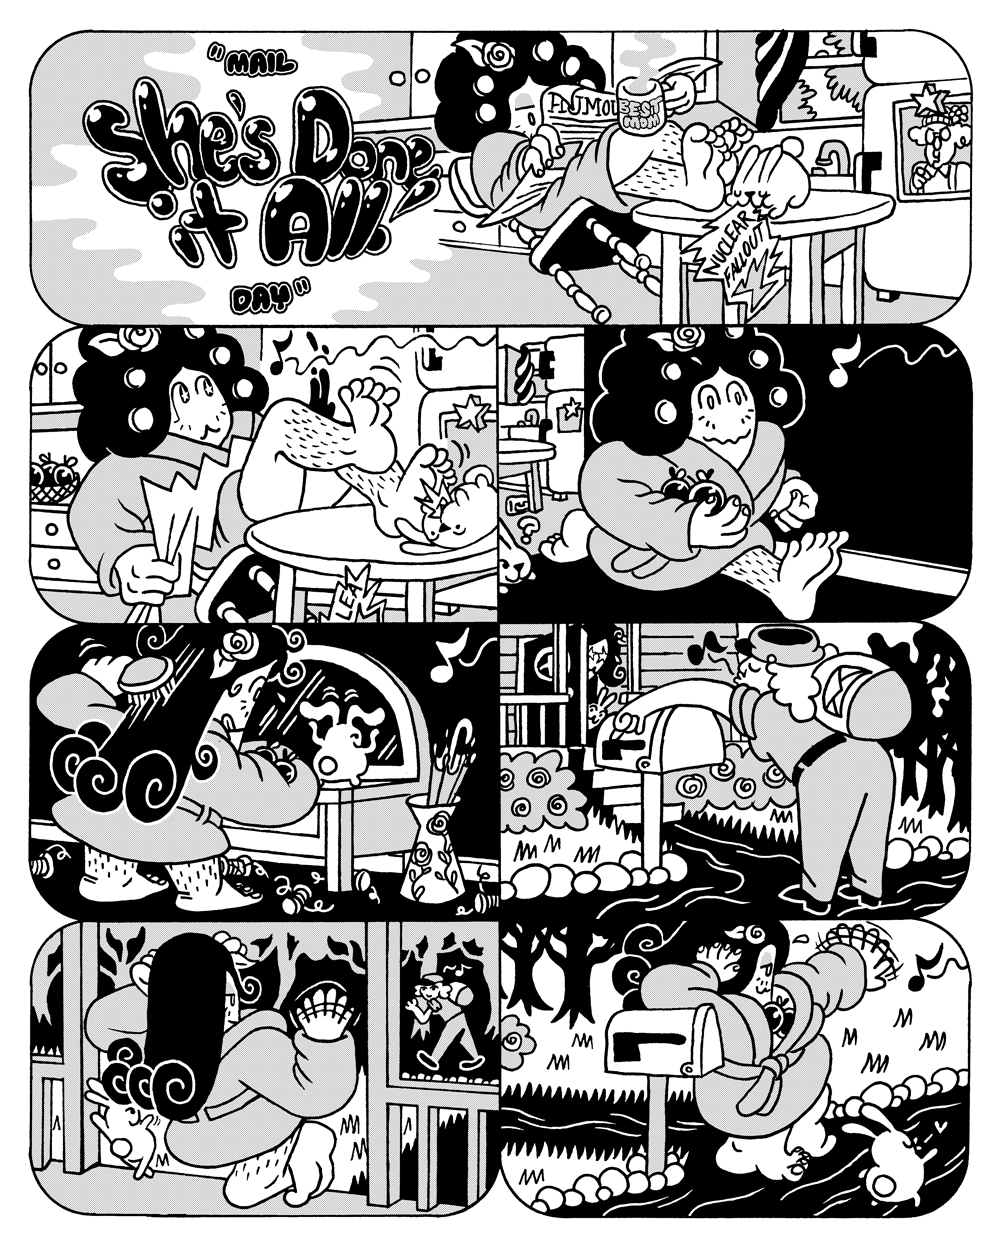 She's Done it All! Part 5 Page 1 by Benjamin Urkowitz by Hazlitt